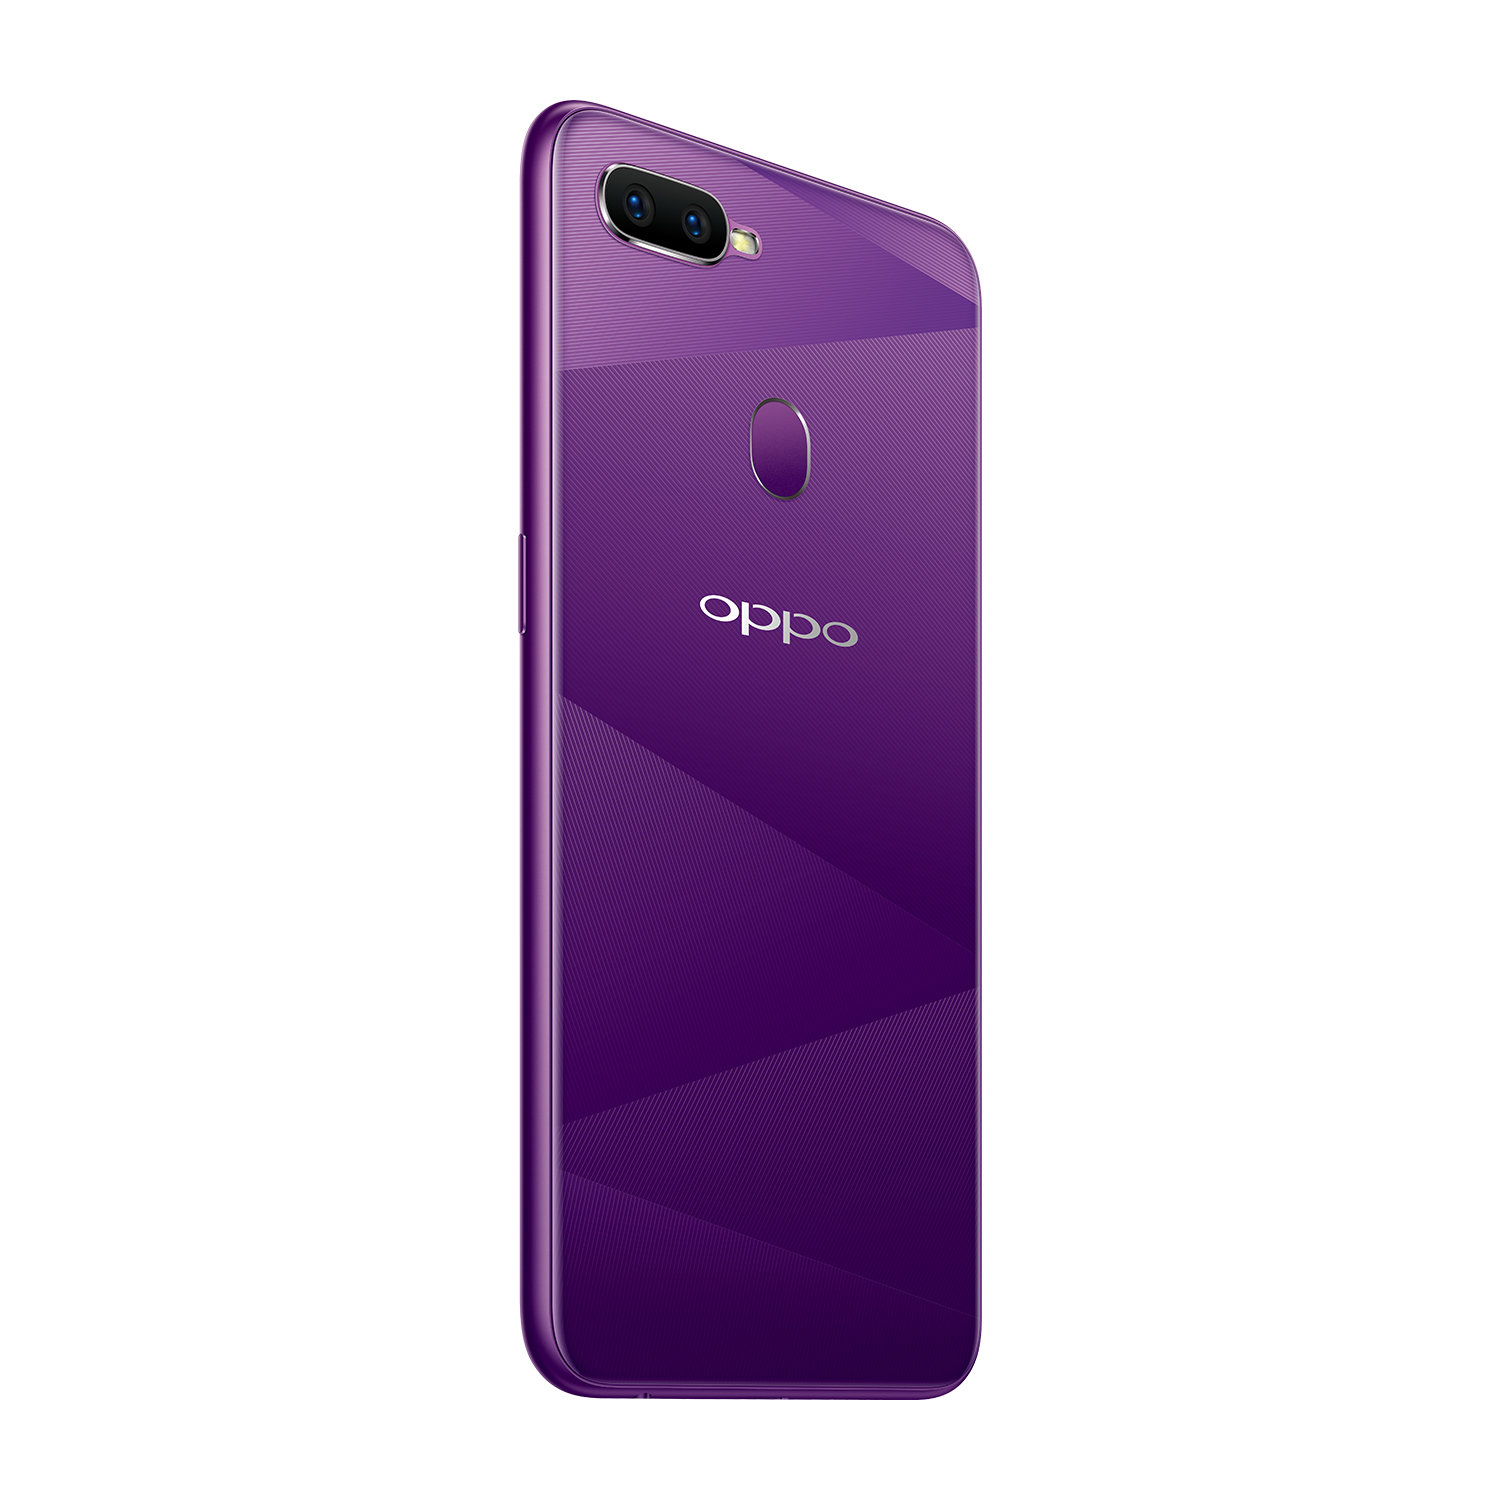  OPPO F9 with 6 3 inch Waterdrop Screen 16MP Front Camera 